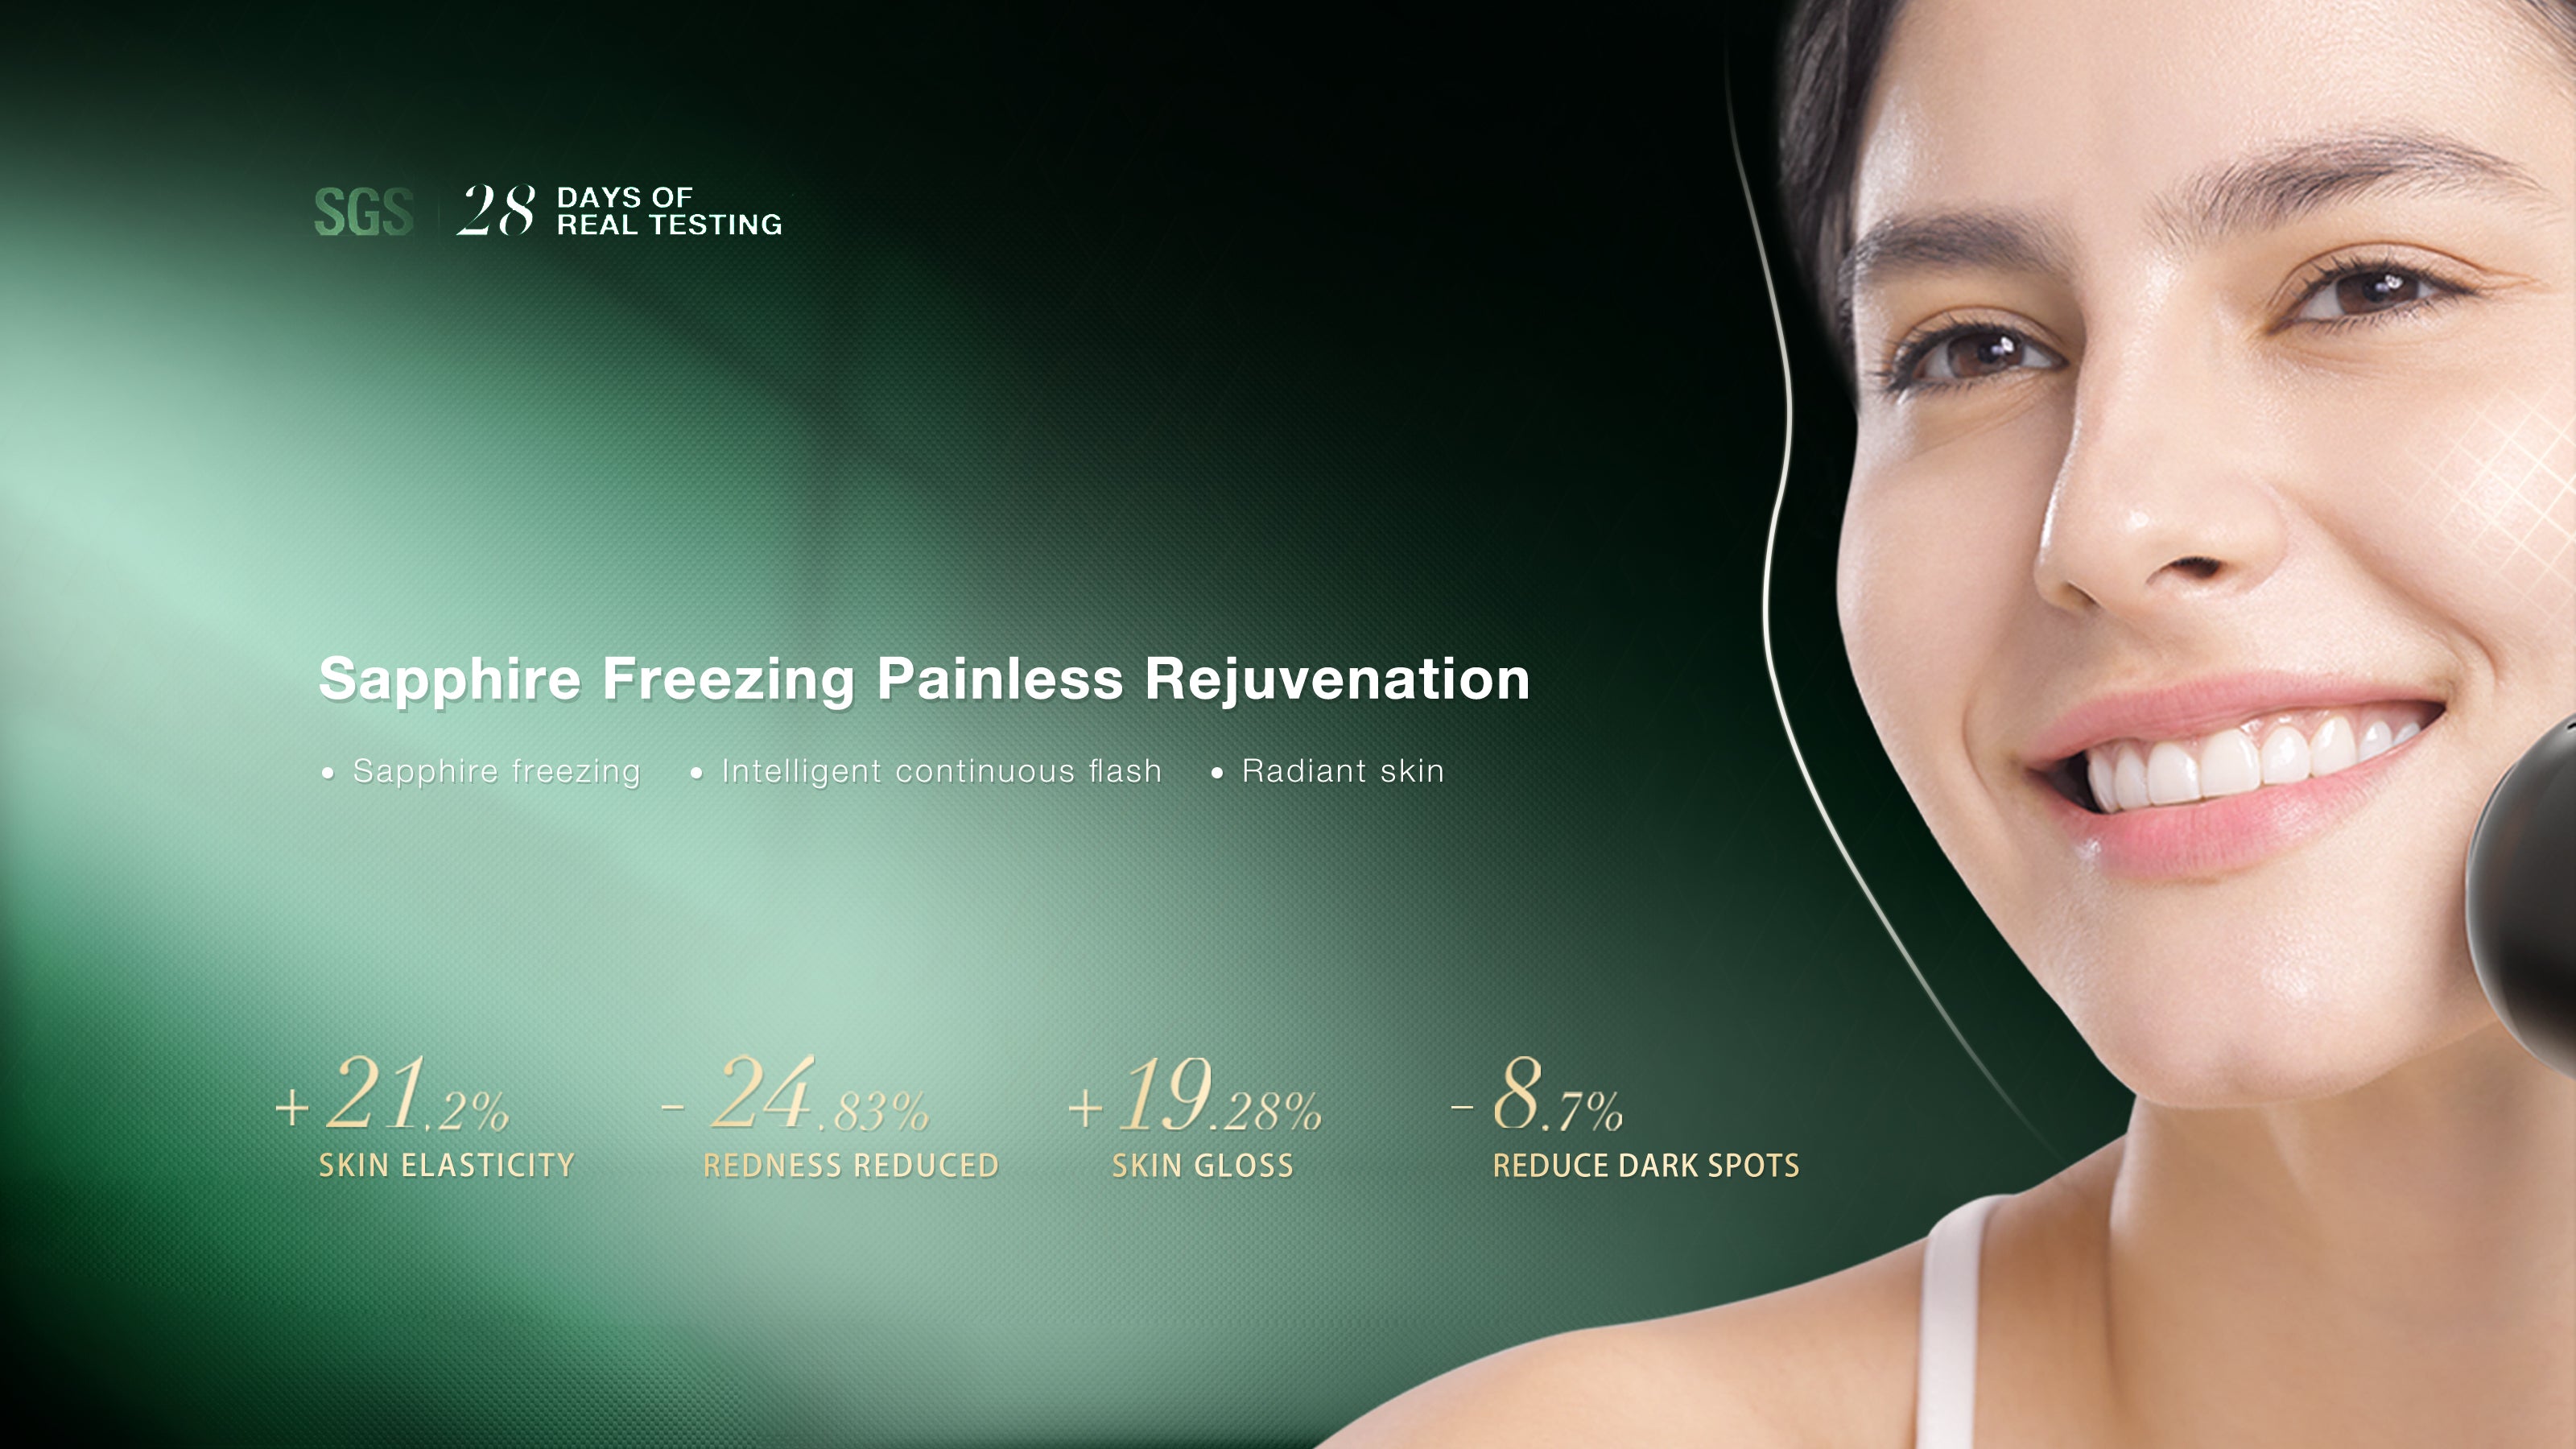 JOVS Blacken PRO DPL Photorejuvenation Skincare Device showcases clinically proven results in 28 days with Sapphire Freezing for painless skin rejuvenation, improving skin elasticity, reducing redness, enhancing gloss, and diminishing dark spots.